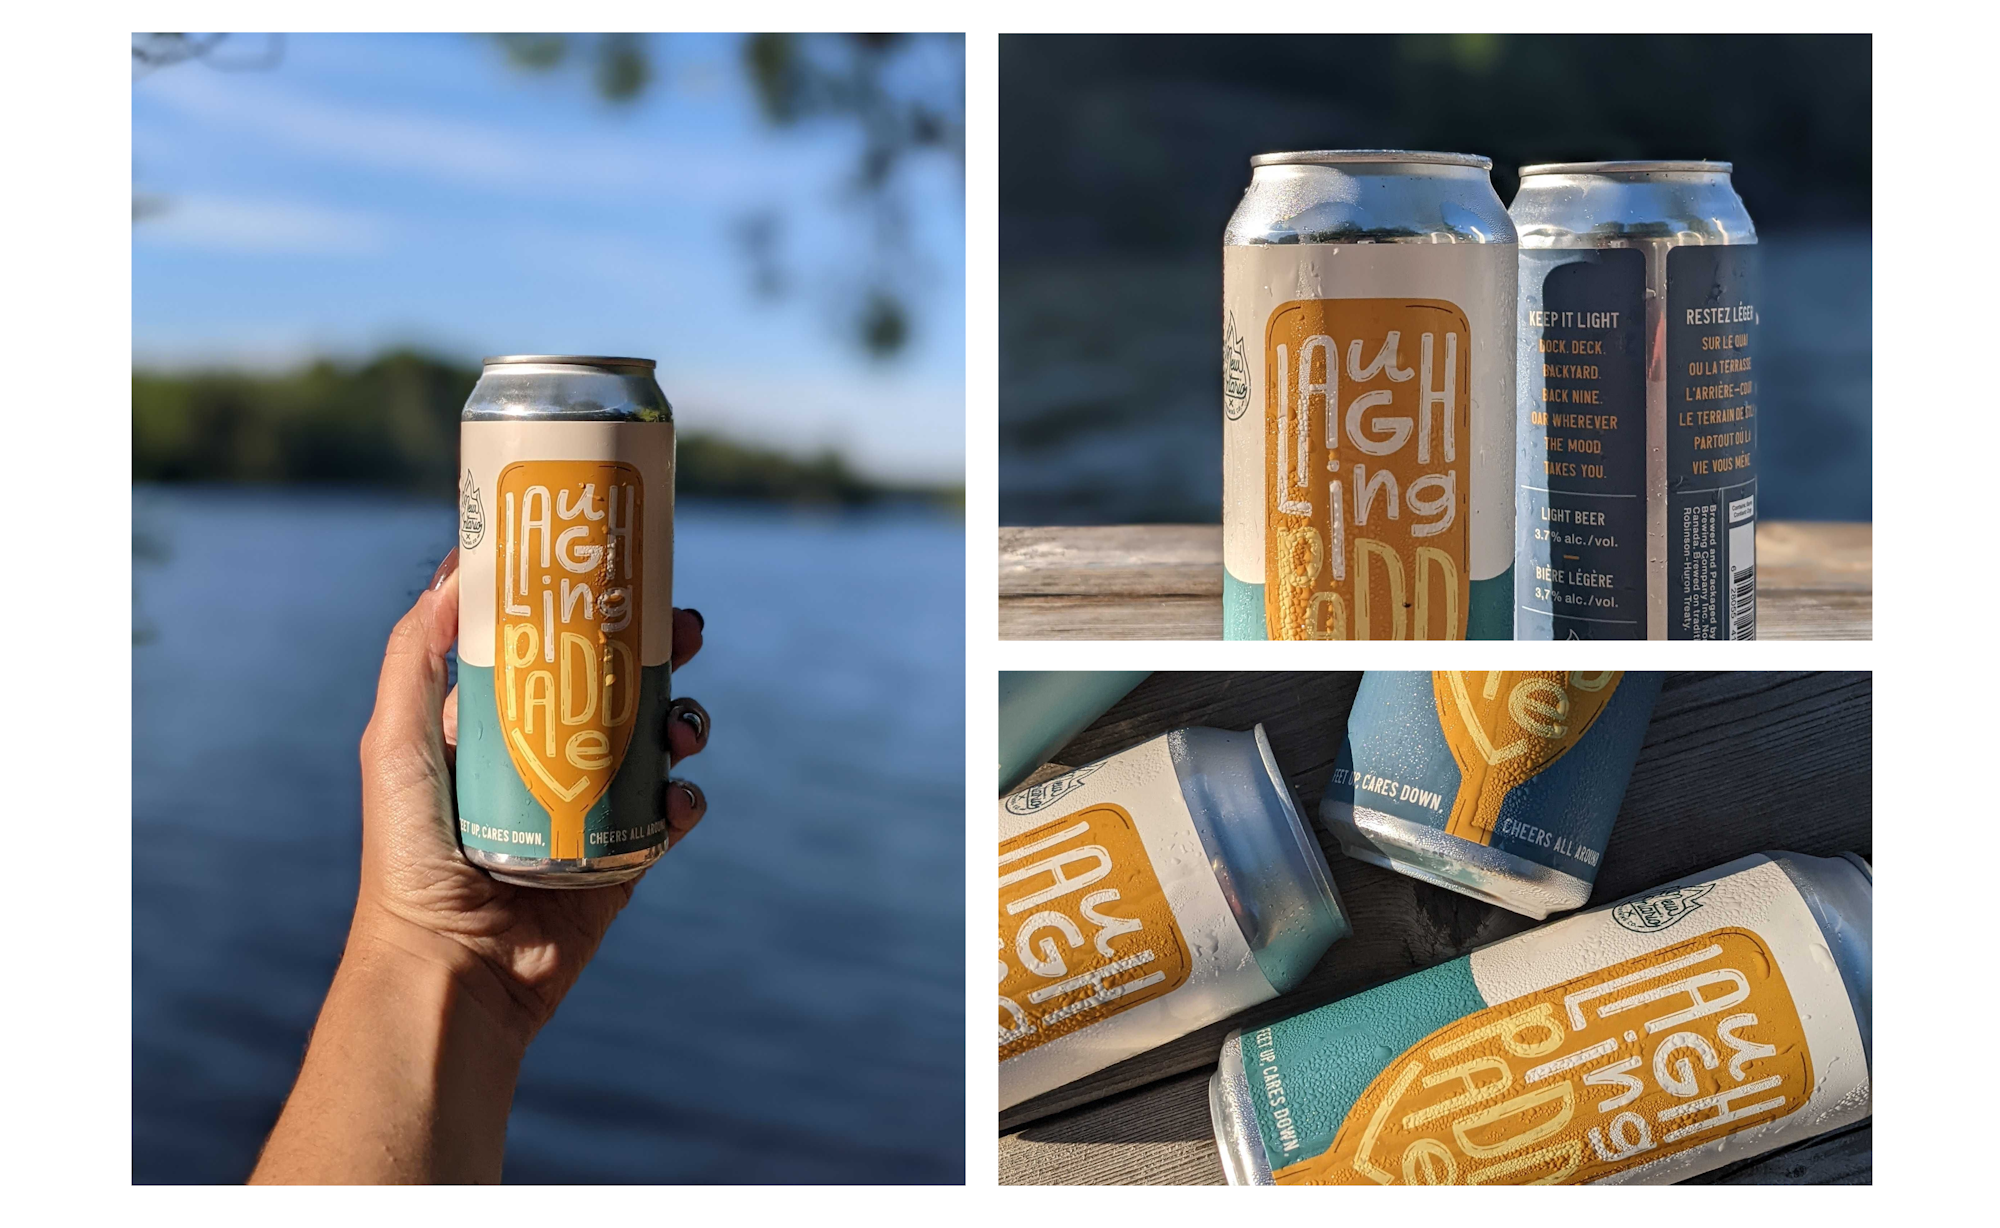 Gallery of Laughing Paddle beer can shots in front of a lake